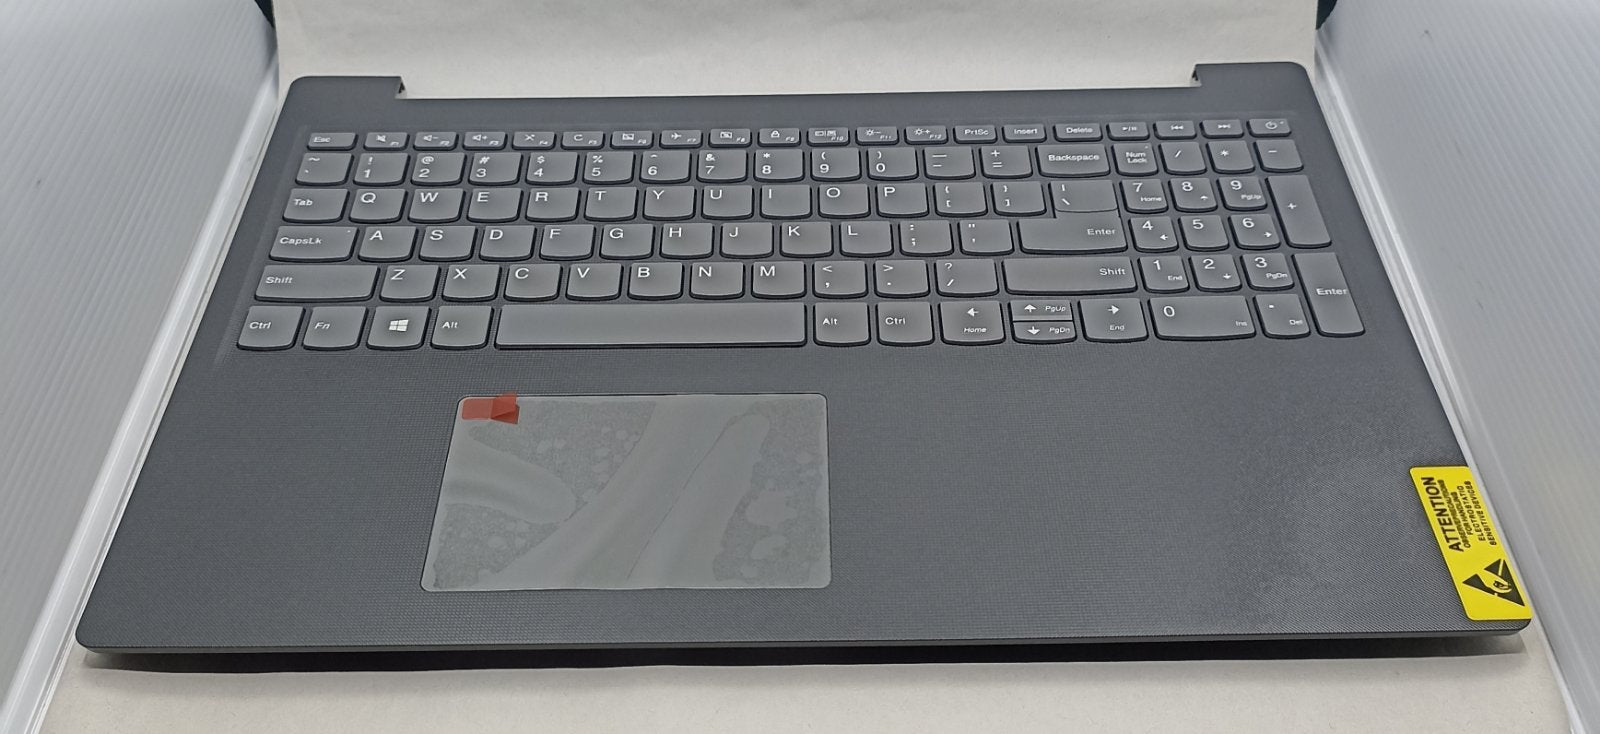 Replacement Keyboard For Lenovo S145-15IGM WL